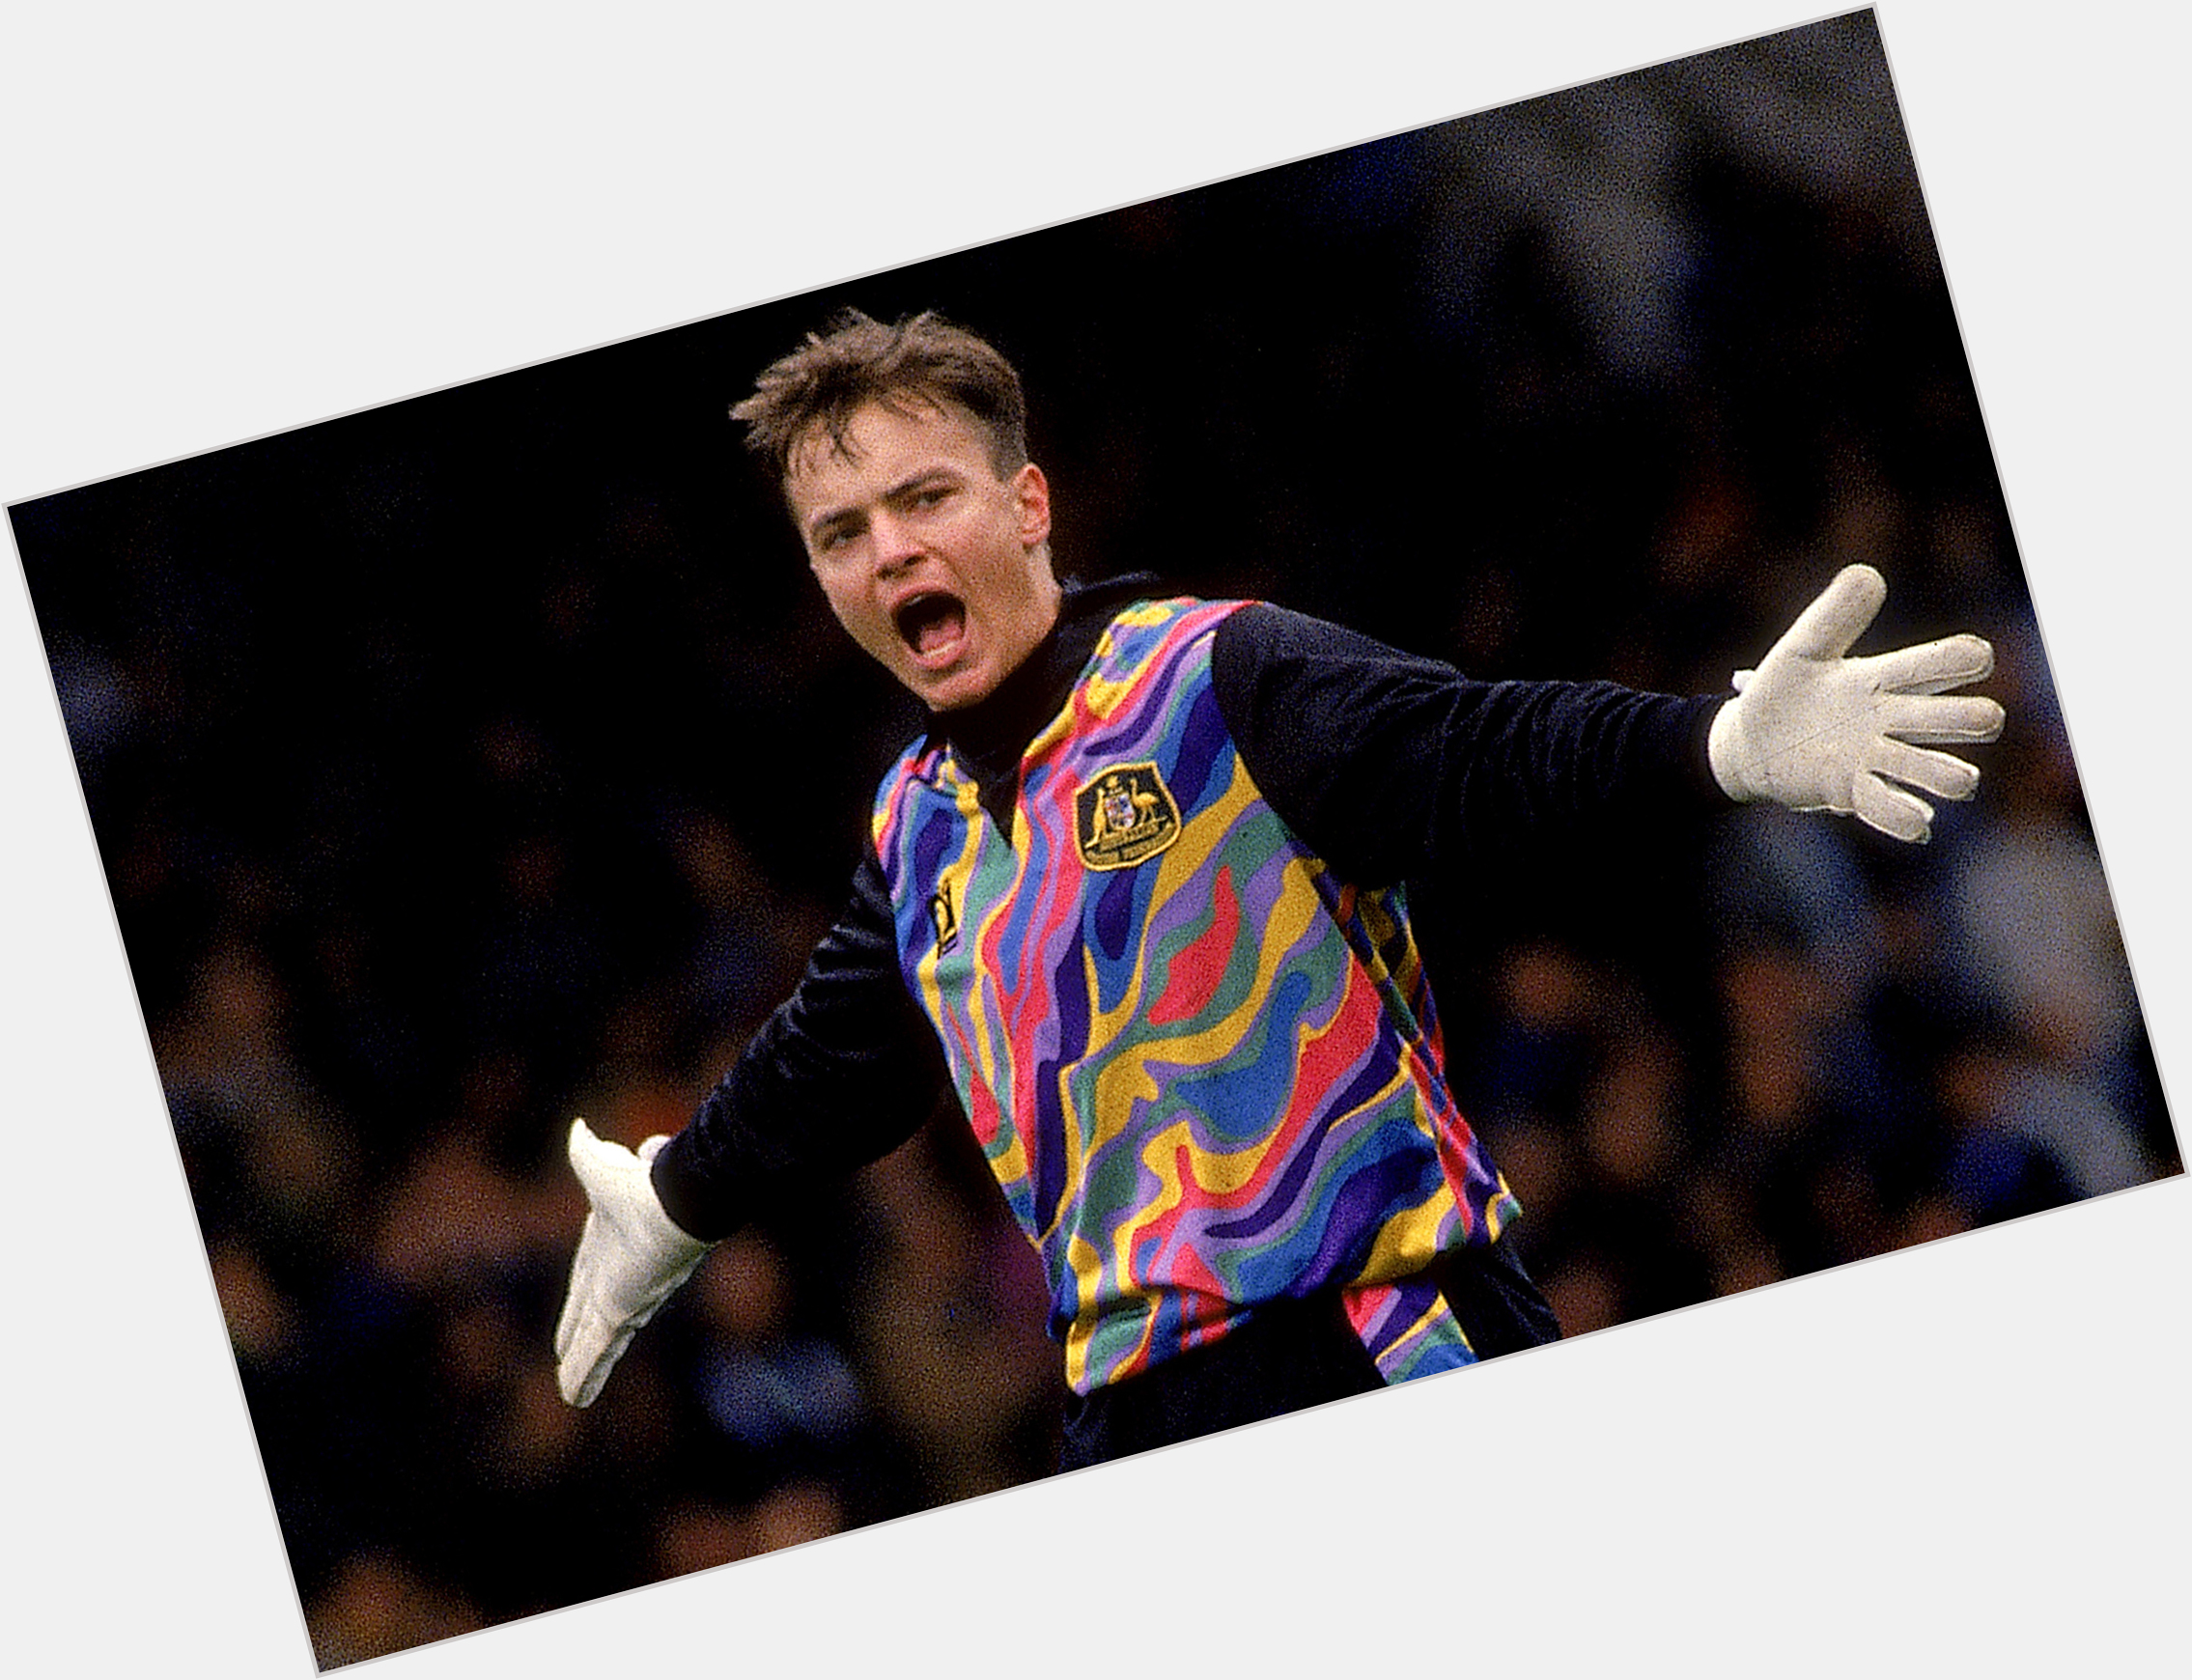 Mark Bosnich light brown hair & hairstyles Athletic body, 